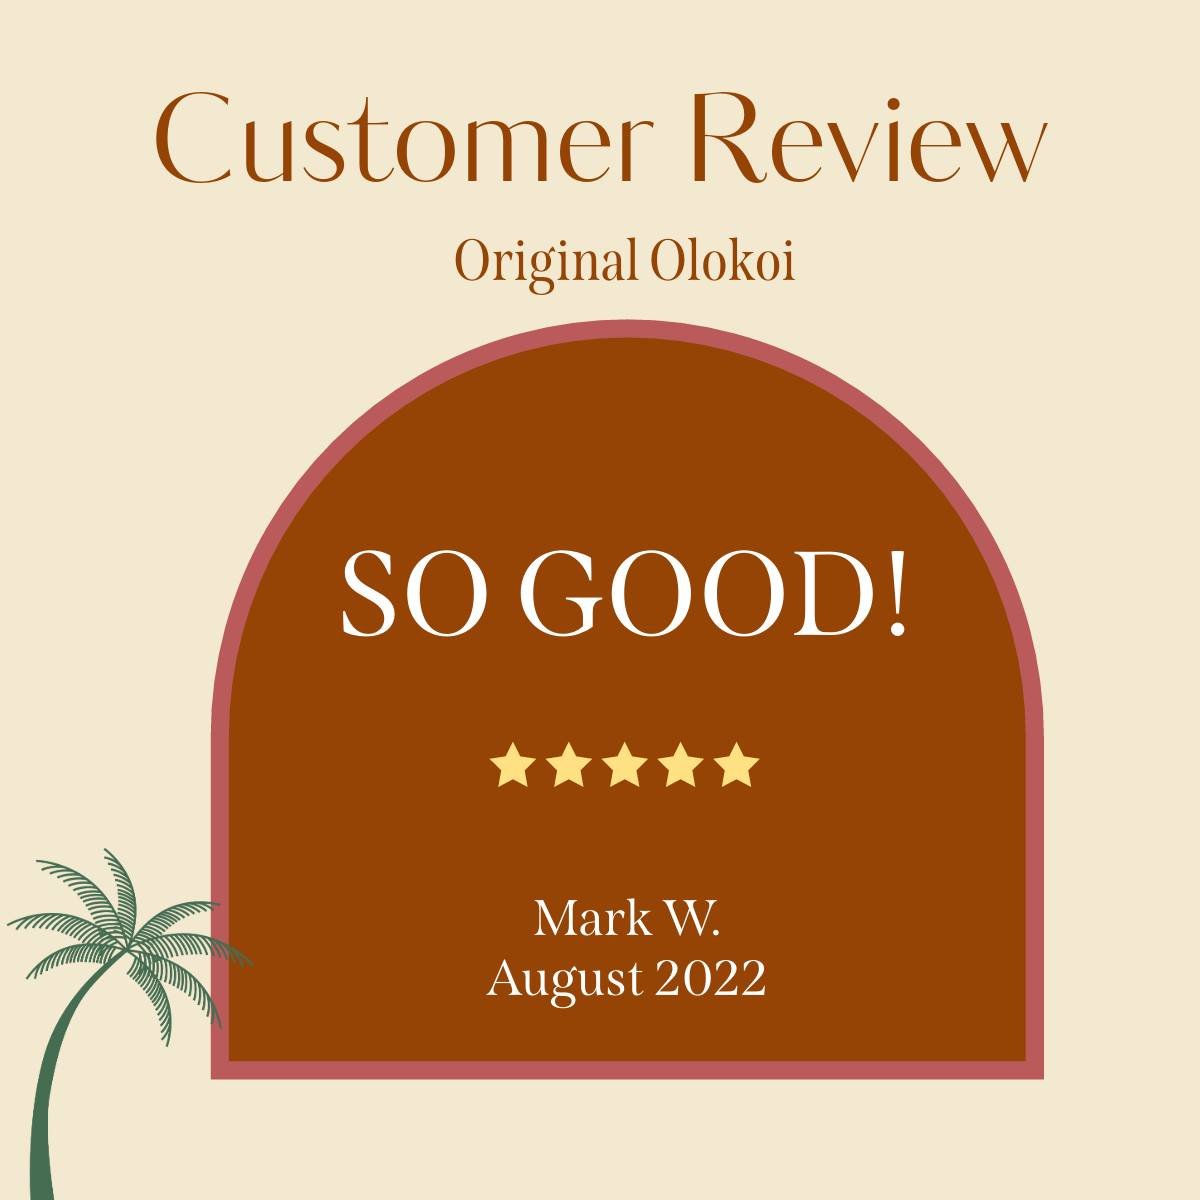 🥰Reflecting back over the years and reading the reviews, always brings a smile to my face. Thank you for loving Olokoi as much as I have!

#lafoodjunkie #sdfoodie #pdxfoodie #portlandfoodie #vancouvereats #seattleeats #ocfoodie #palau #olokoisauce #